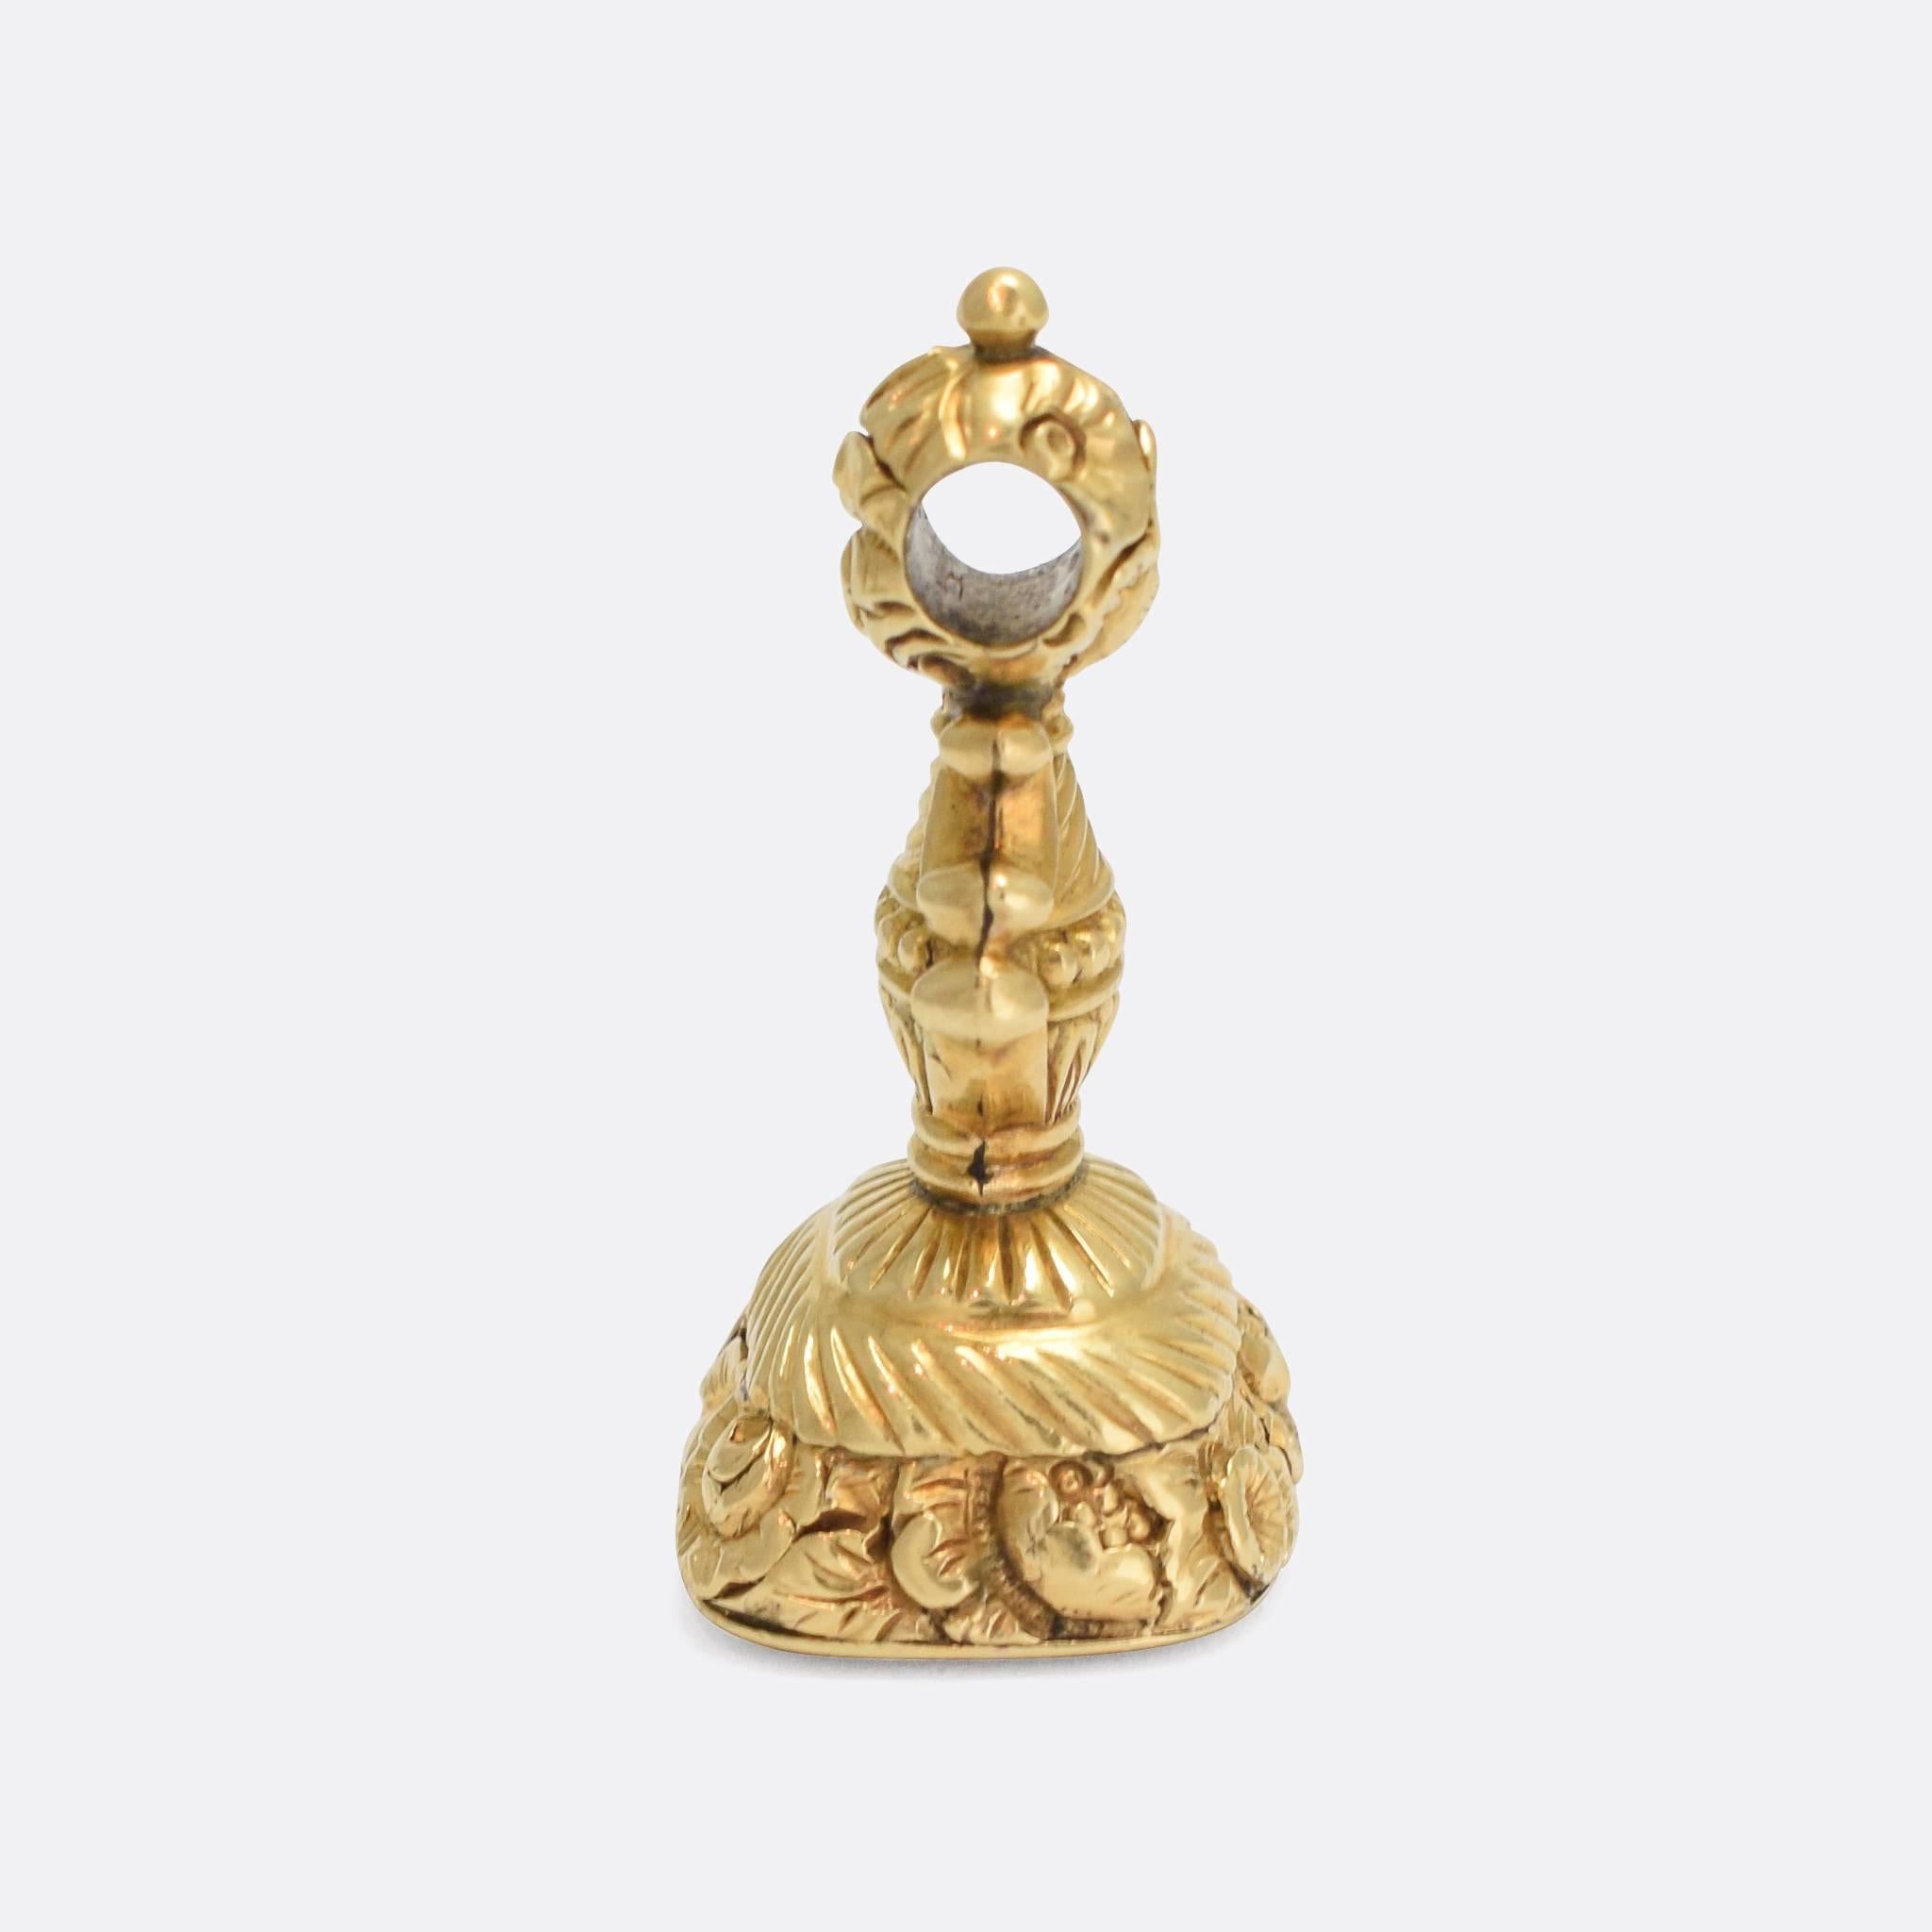 A fine quality 18th Century seal fob, a good substantial size and modelled in 15k gold. The base is set with an uncarved carnelian panel, and the fob itself is deeply chased with orange blossom and other foliate detailing. It would have originally